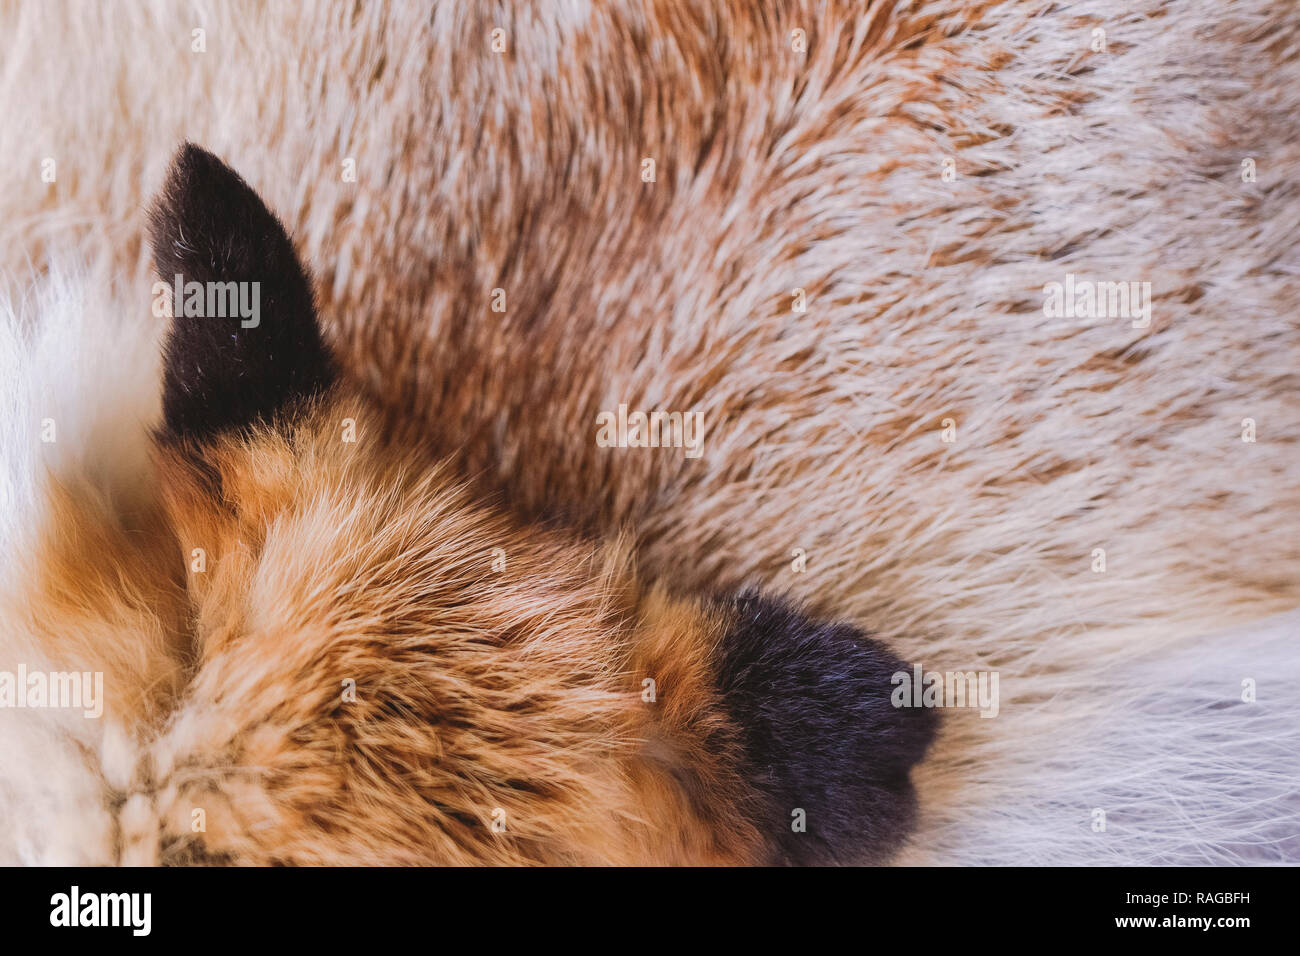 Closeup top view of fluffy texture of colorful real fox animal fur. Natural furry background with dark animal ears. Horizontal color photo. Stock Photo